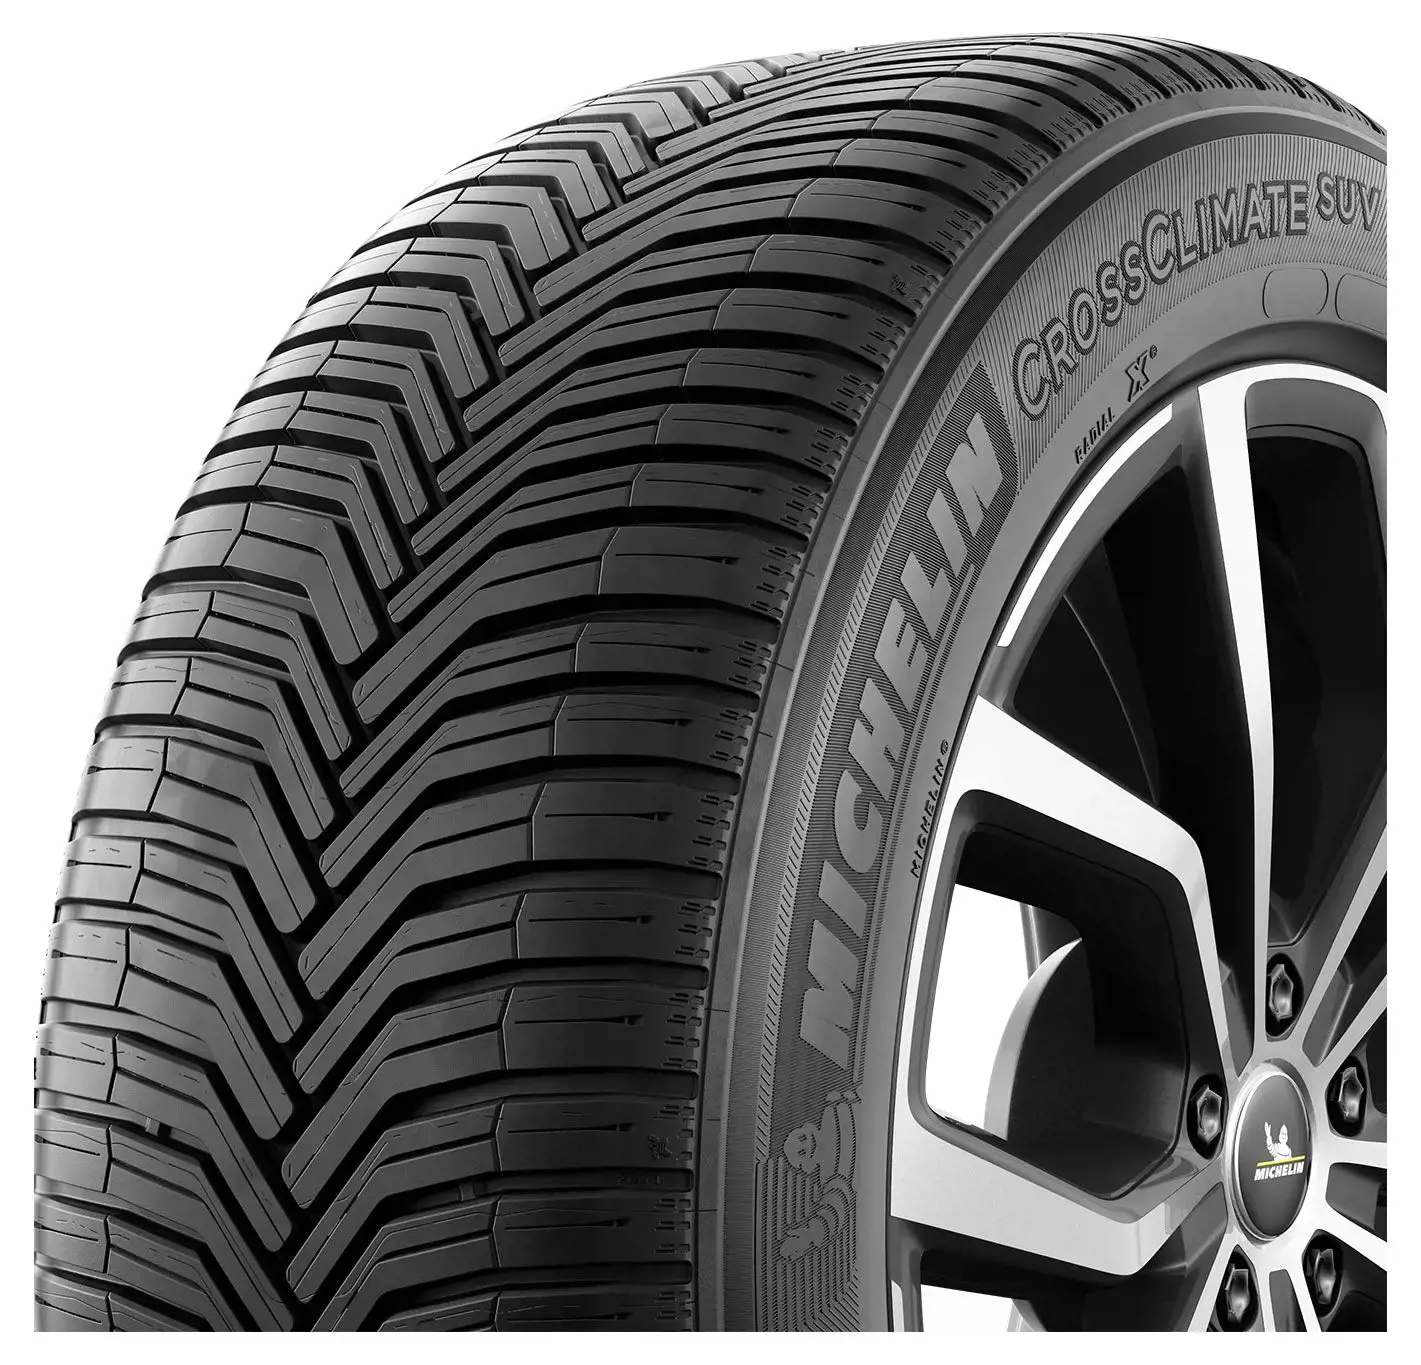 225/65 R17 106V CrossClimate SUV S1 XL